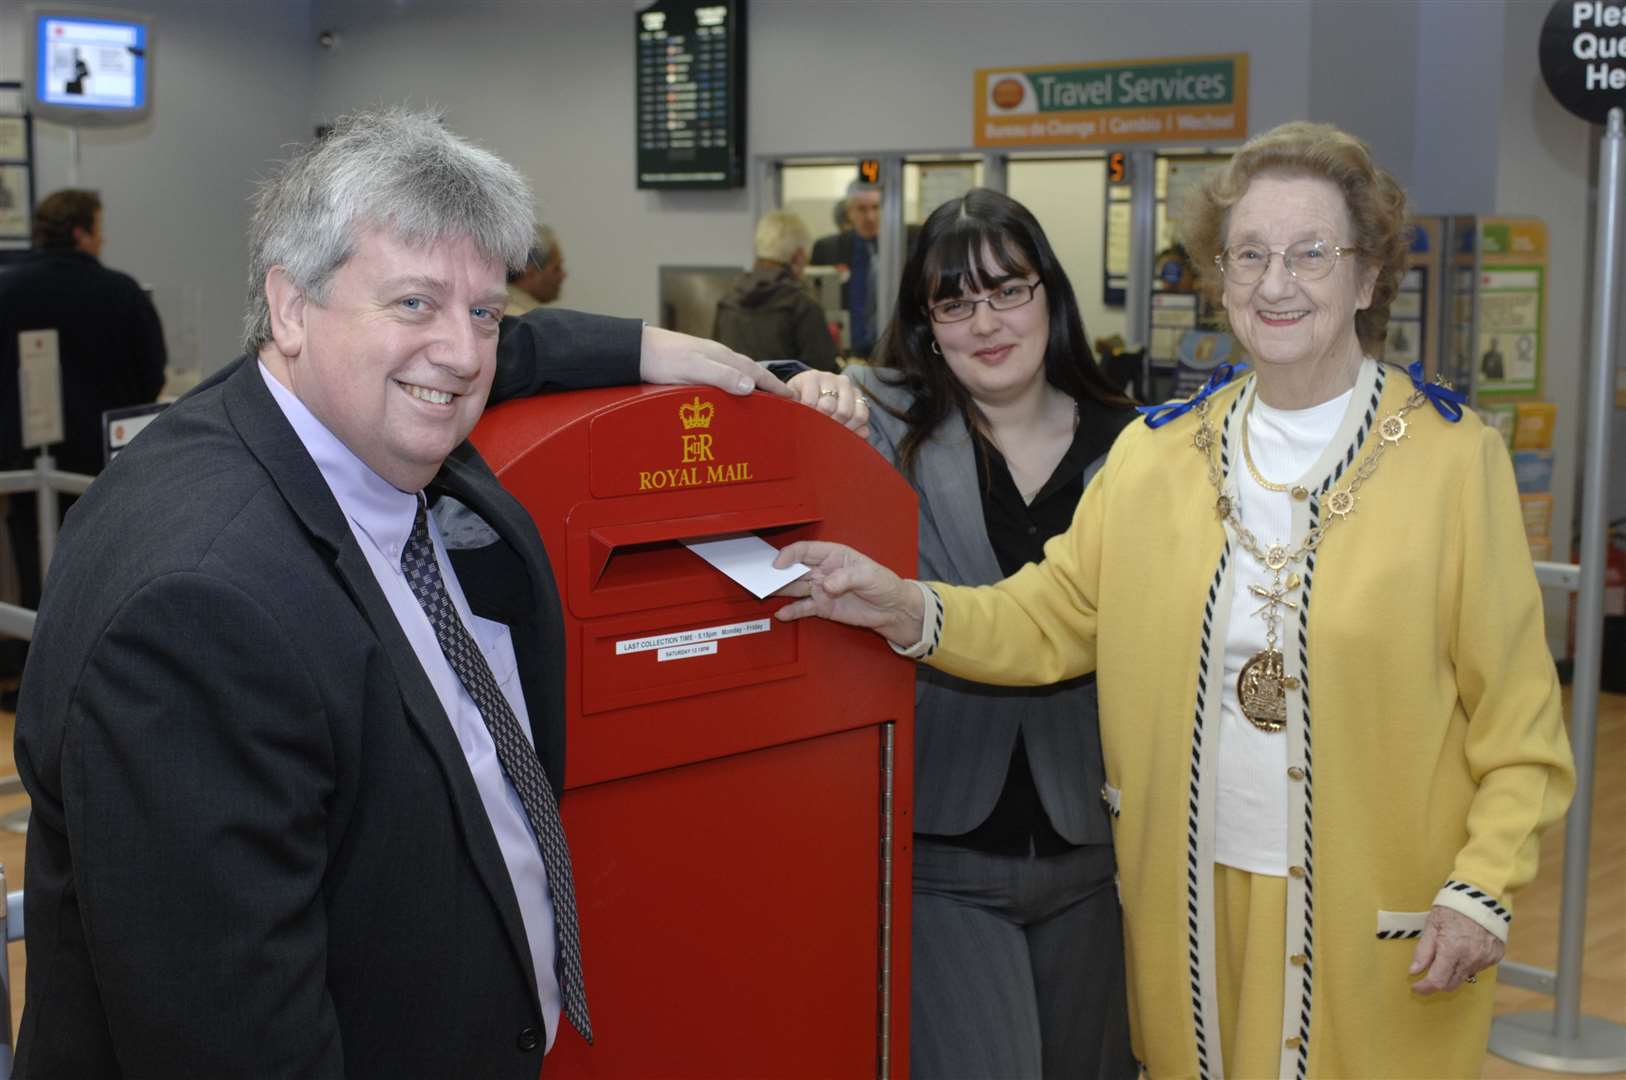 The Post Office within WH Smith in the St George's Centre, Gravesend, opened in 2008. Pictured at the opening are (from left): Post Office branch manager Phillip Willing, WH Smith store manager Danielle Delahunty, and former Gravesham Mayor Cllr Pat Oakeshott. Picture: Matthew Reading